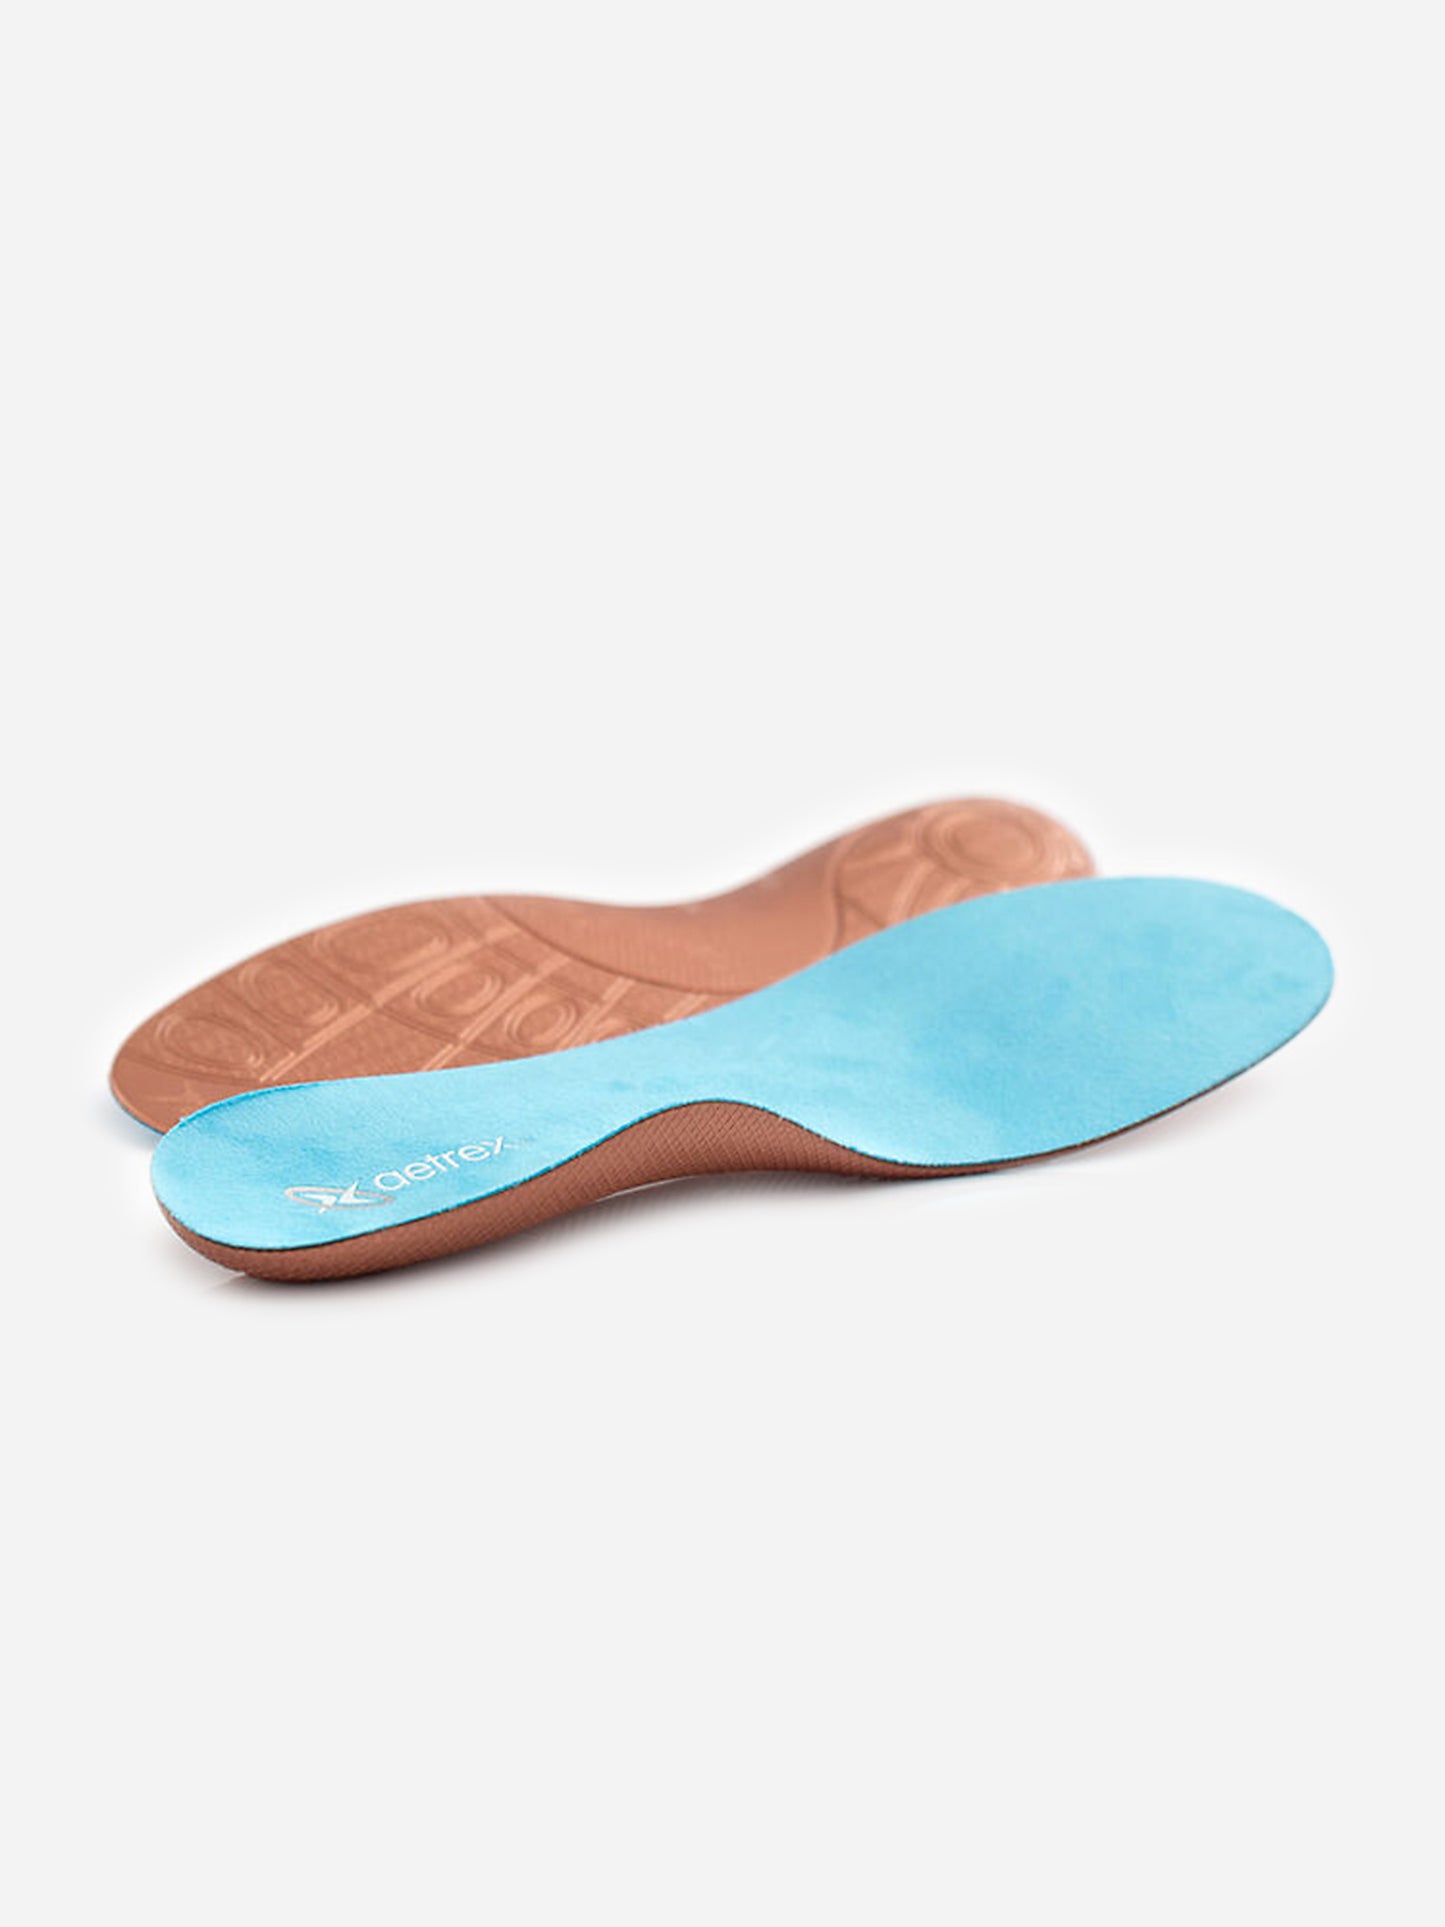 Aetrex Thinsoles Orthotics Insole